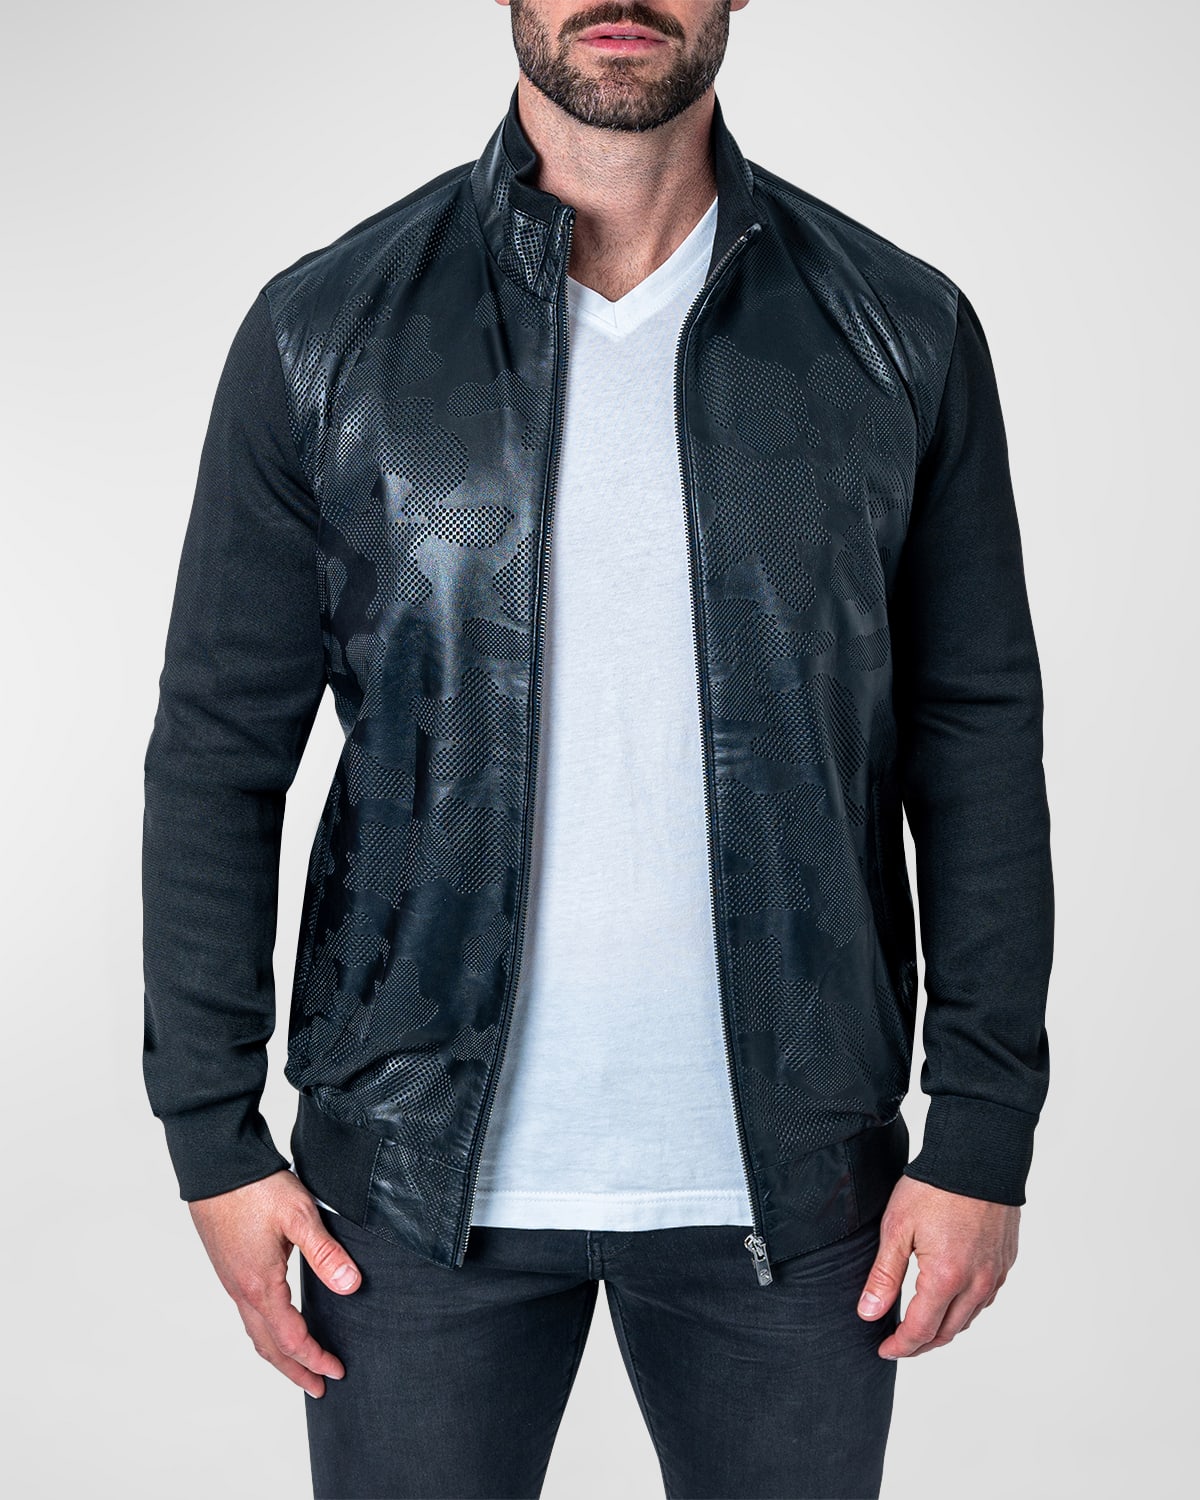 MACEOO MEN'S LEATHER MAP JACKET